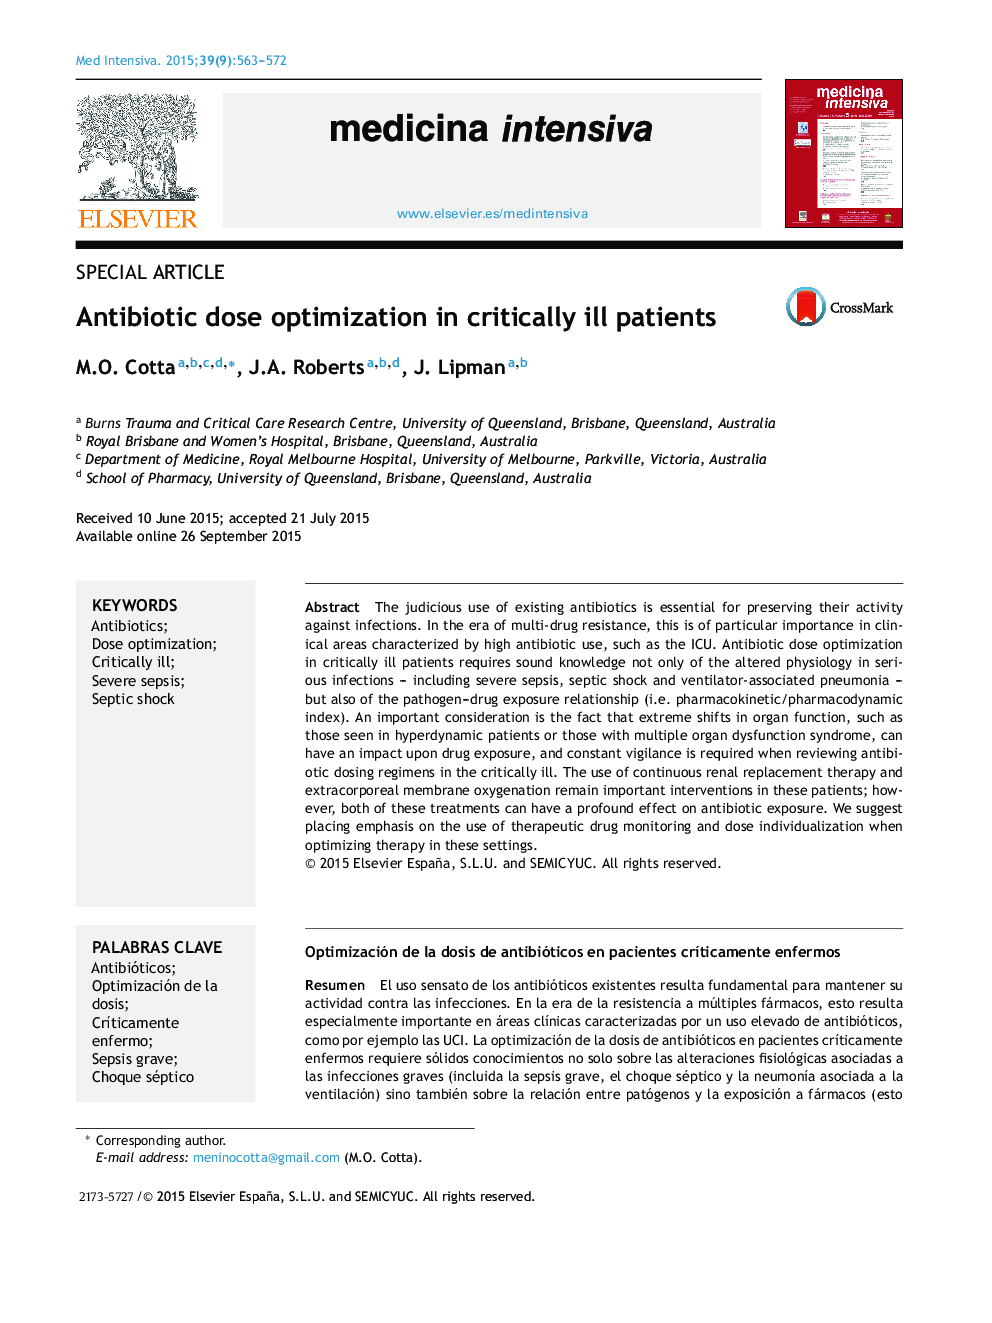 Antibiotic dose optimization in critically ill patients